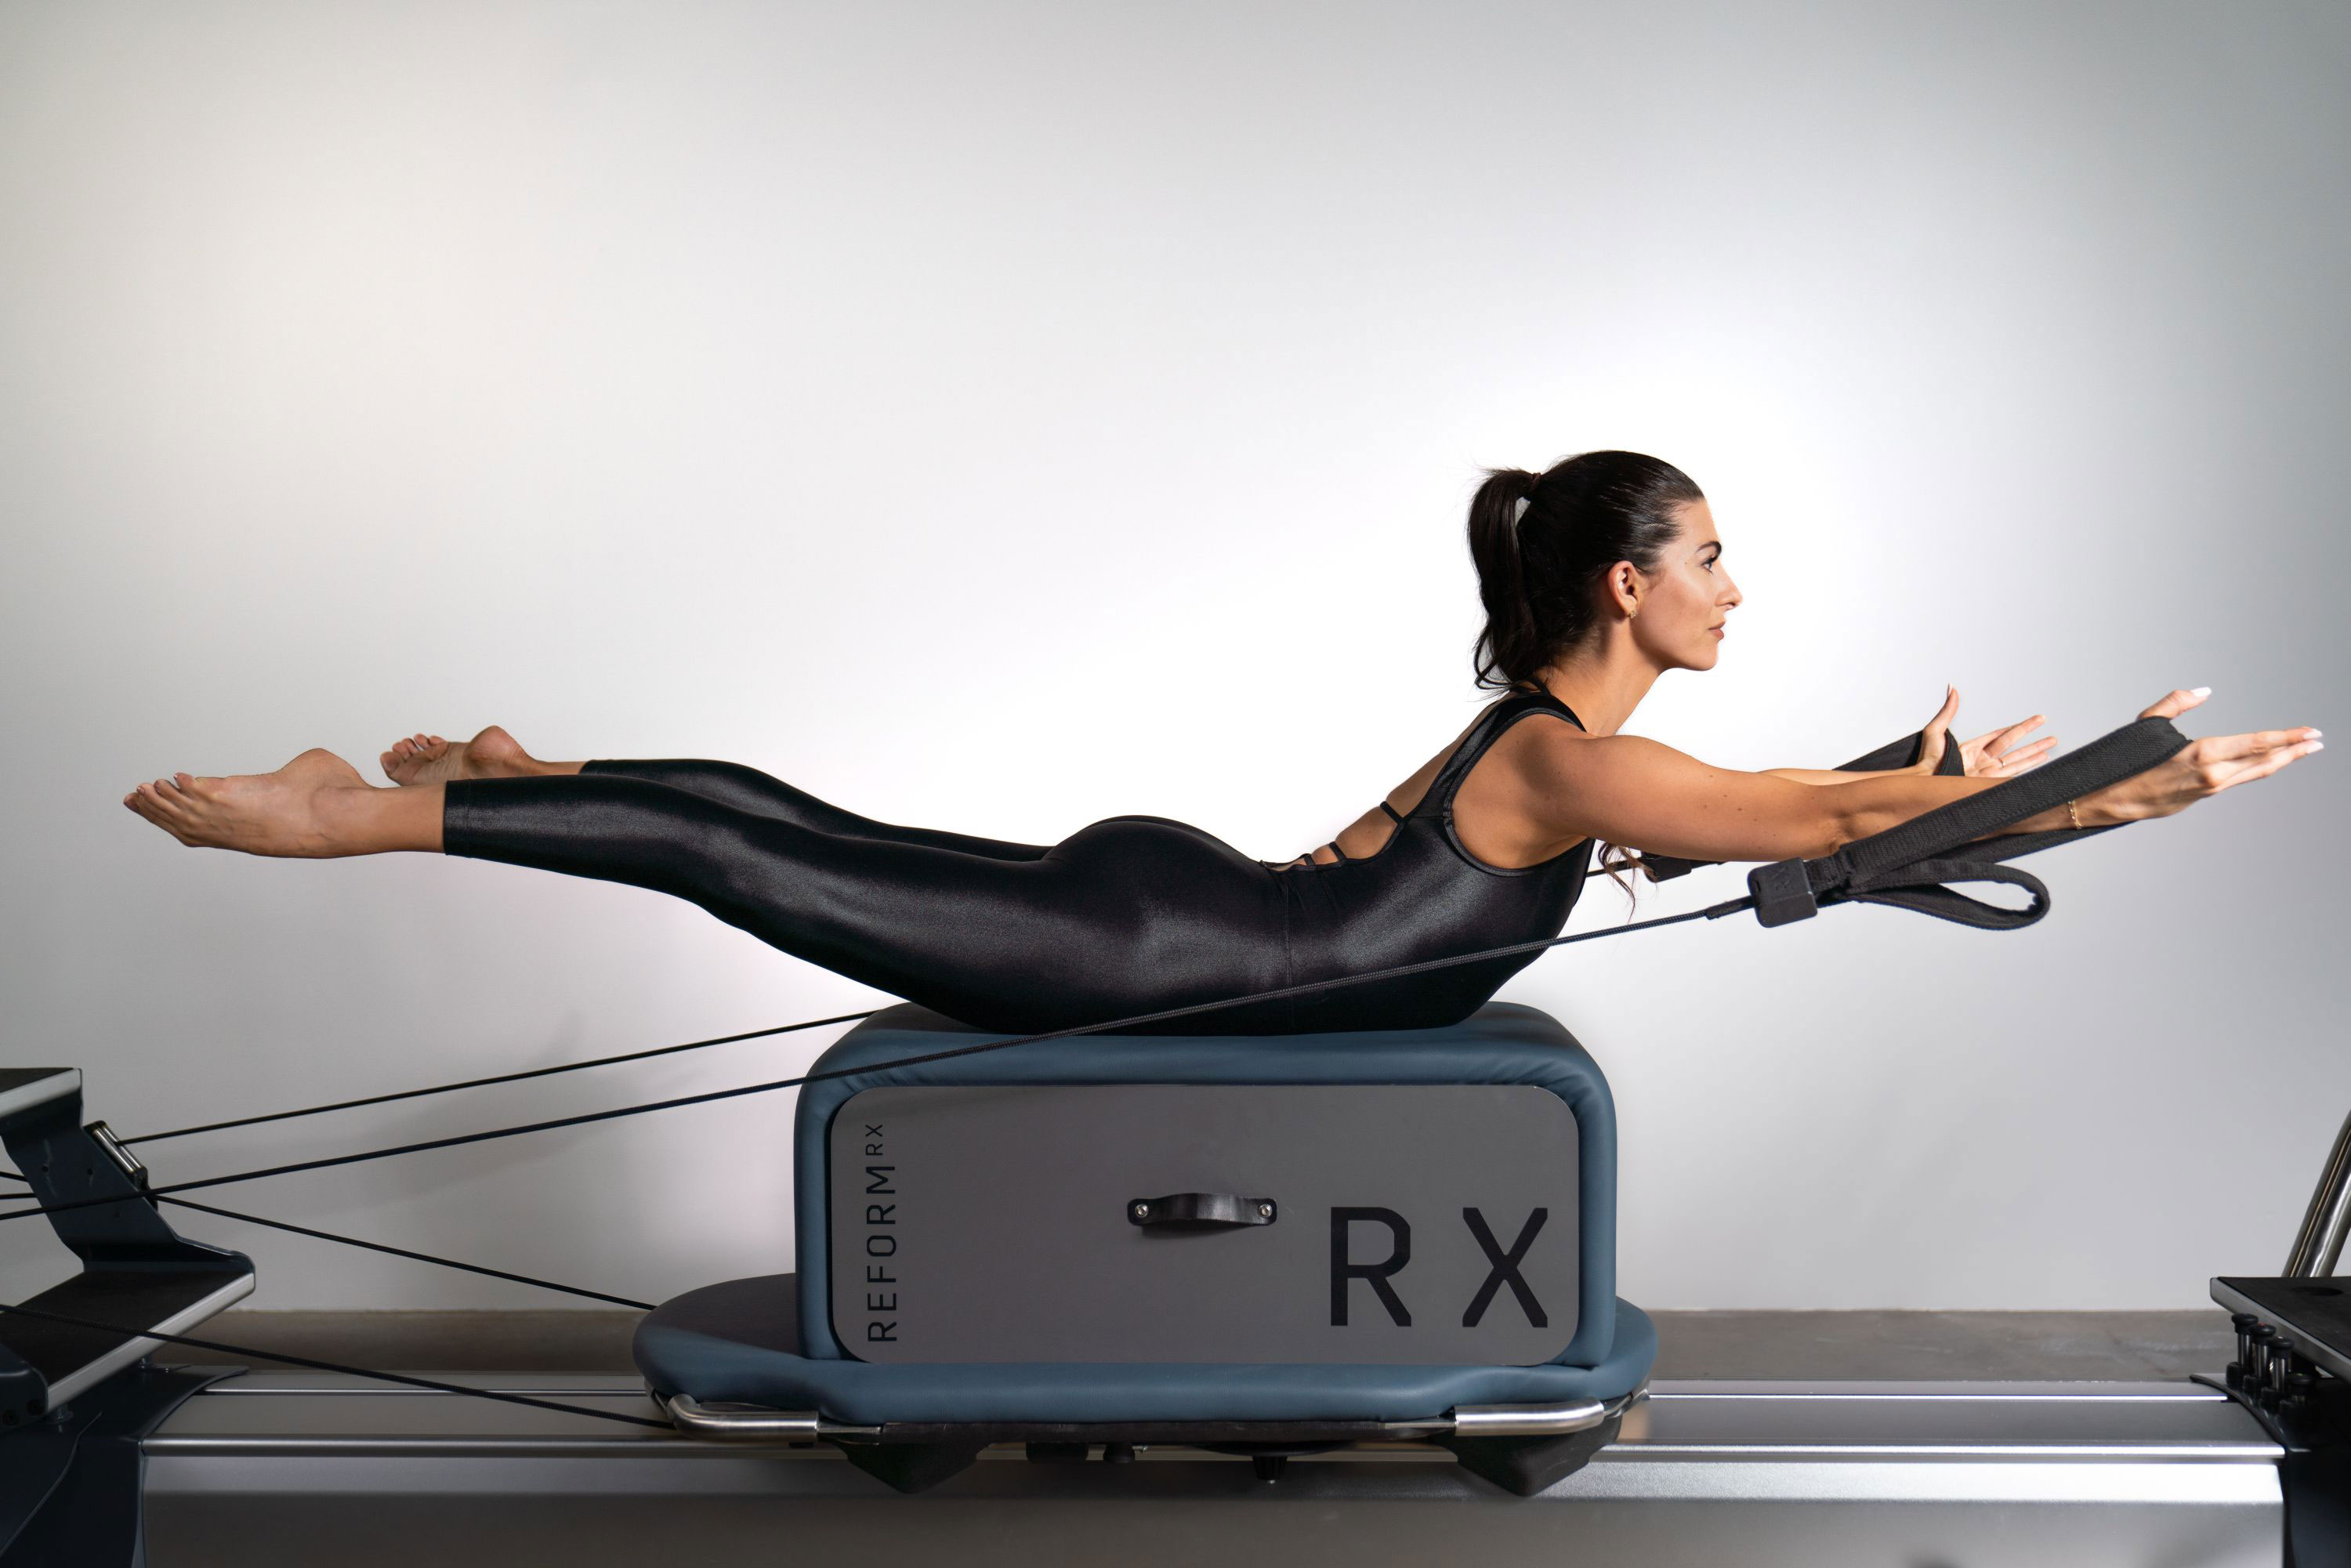 Reform RX Brings the Future of Pilates to Southern California With